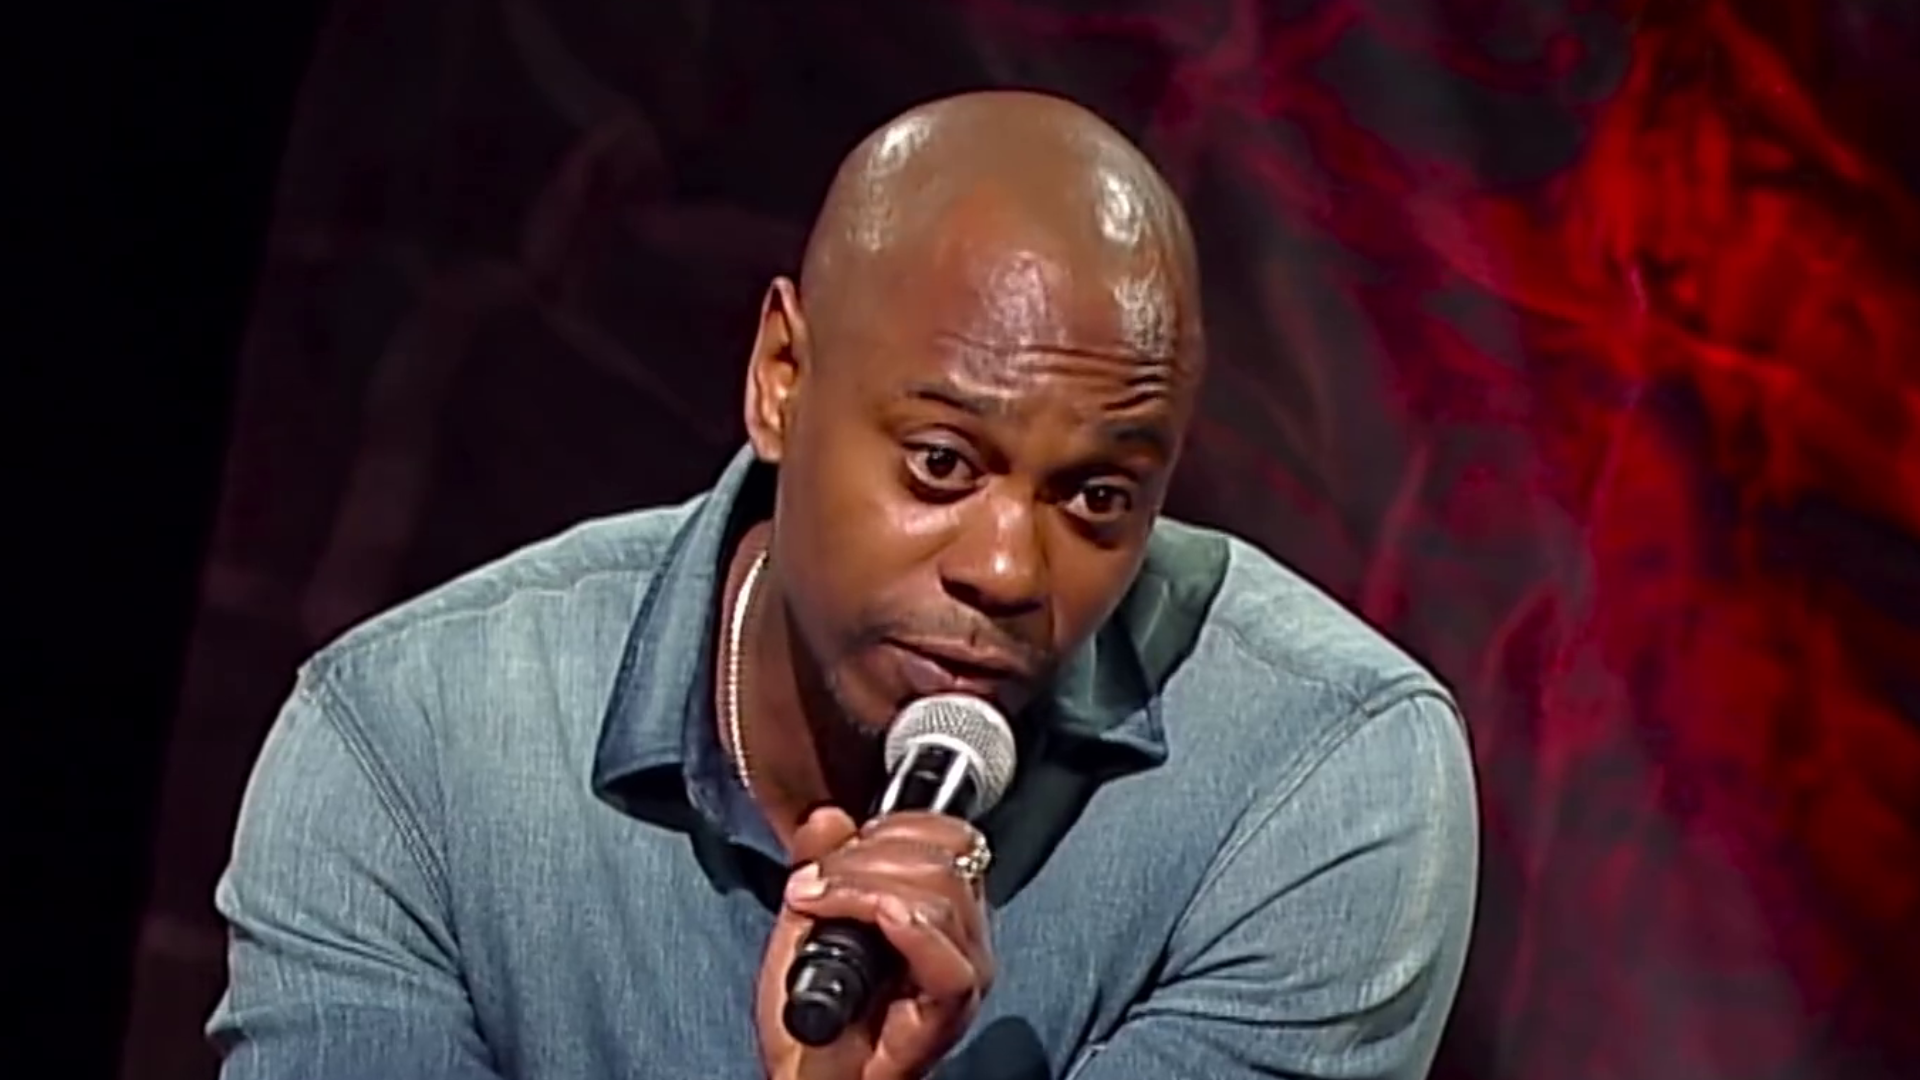 ‘Bigot’: Dave Chappelle Jeered, Booed by Students at His Old High School